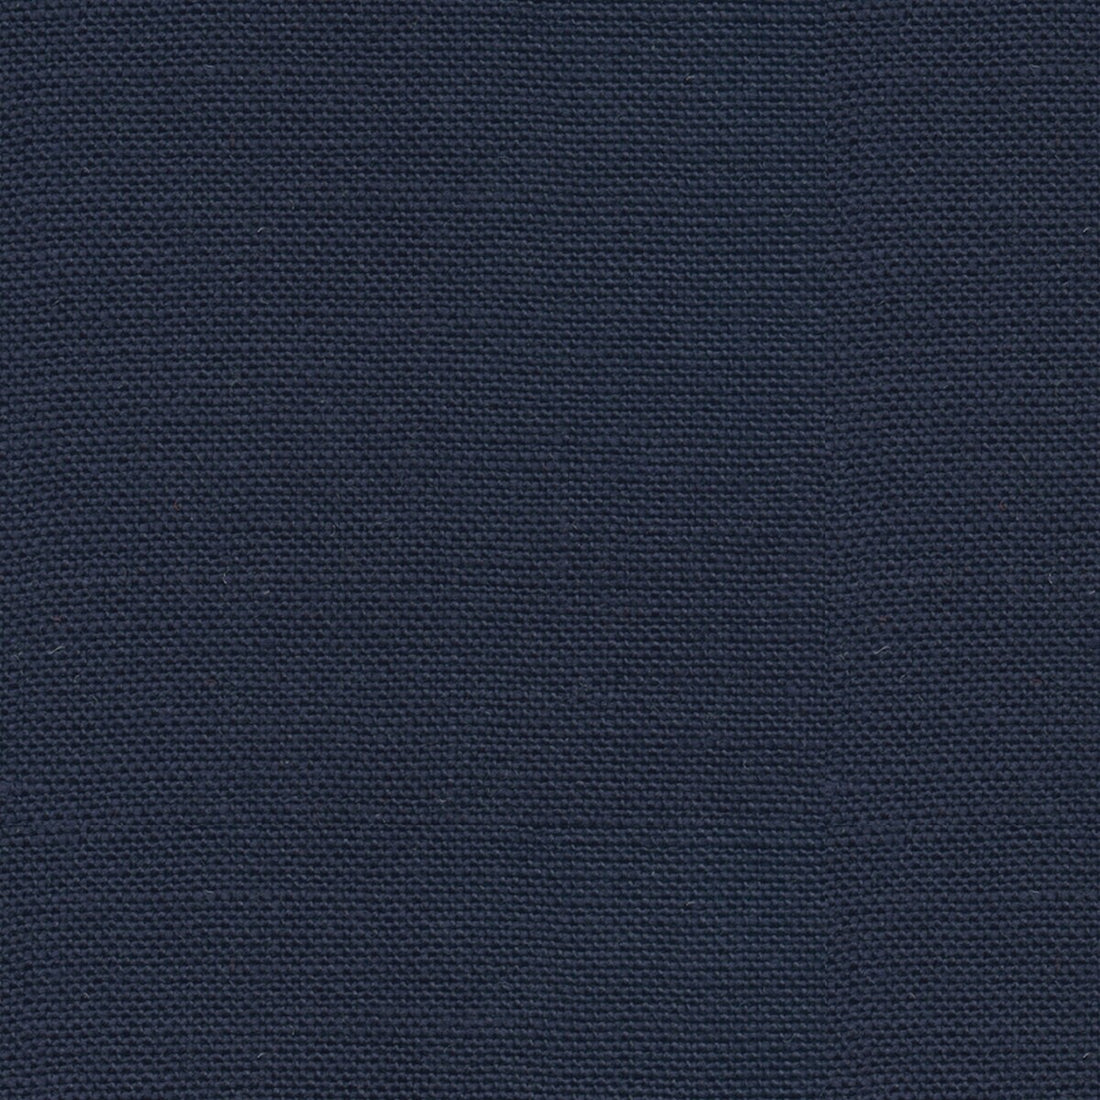 Newport fabric in indigo color - pattern ED85116.680.0 - by Threads in the Variation collection